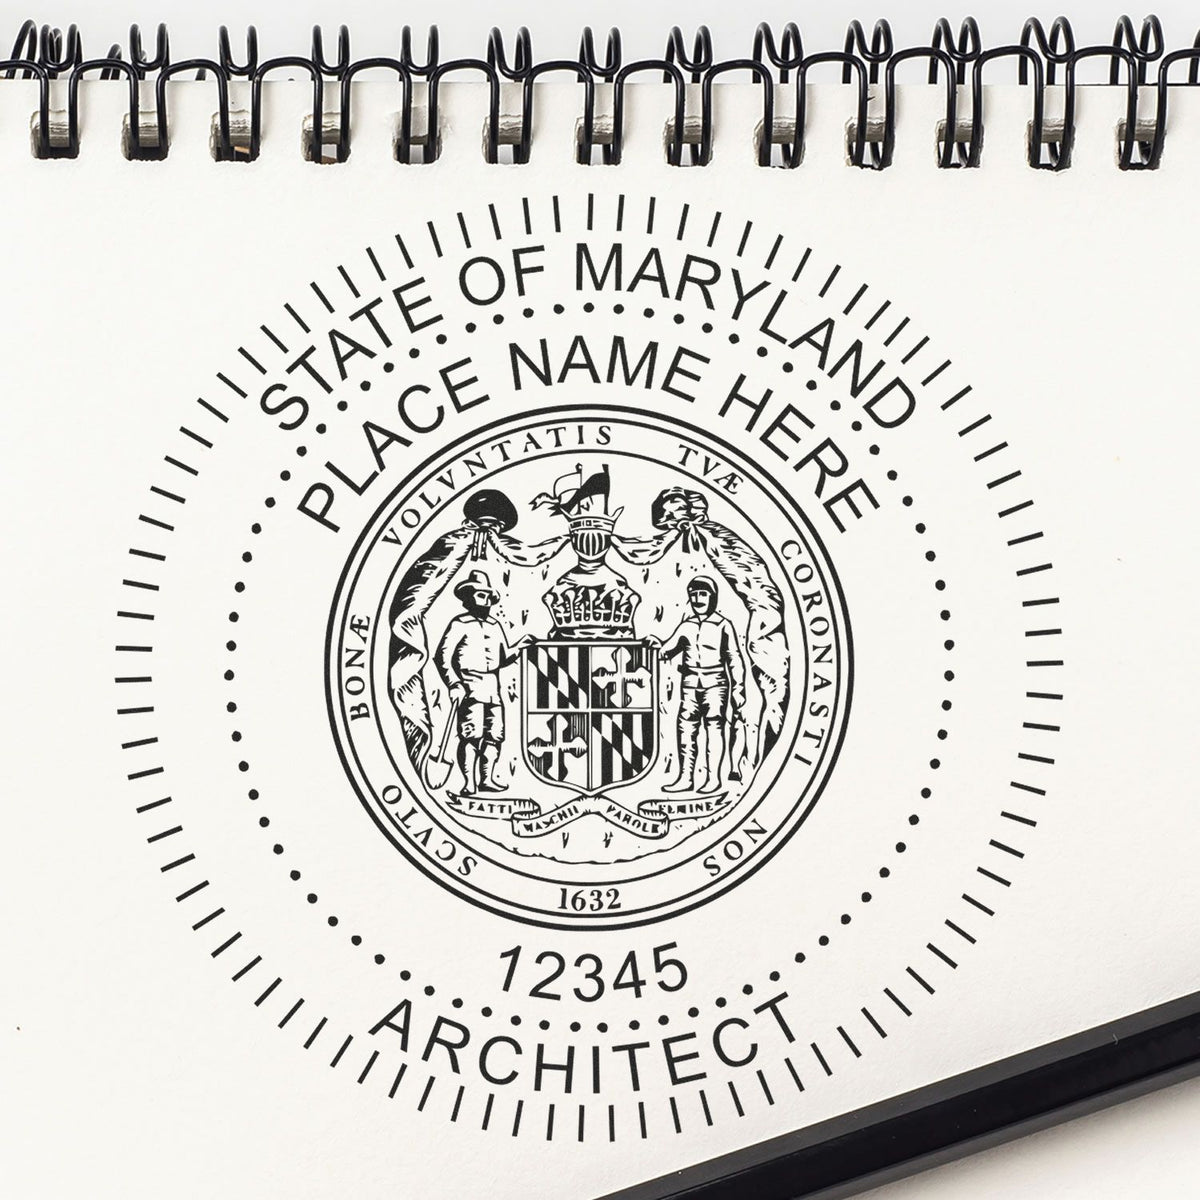 Slim Pre-Inked Maryland Architect Seal Stamp in use photo showing a stamped imprint of the Slim Pre-Inked Maryland Architect Seal Stamp